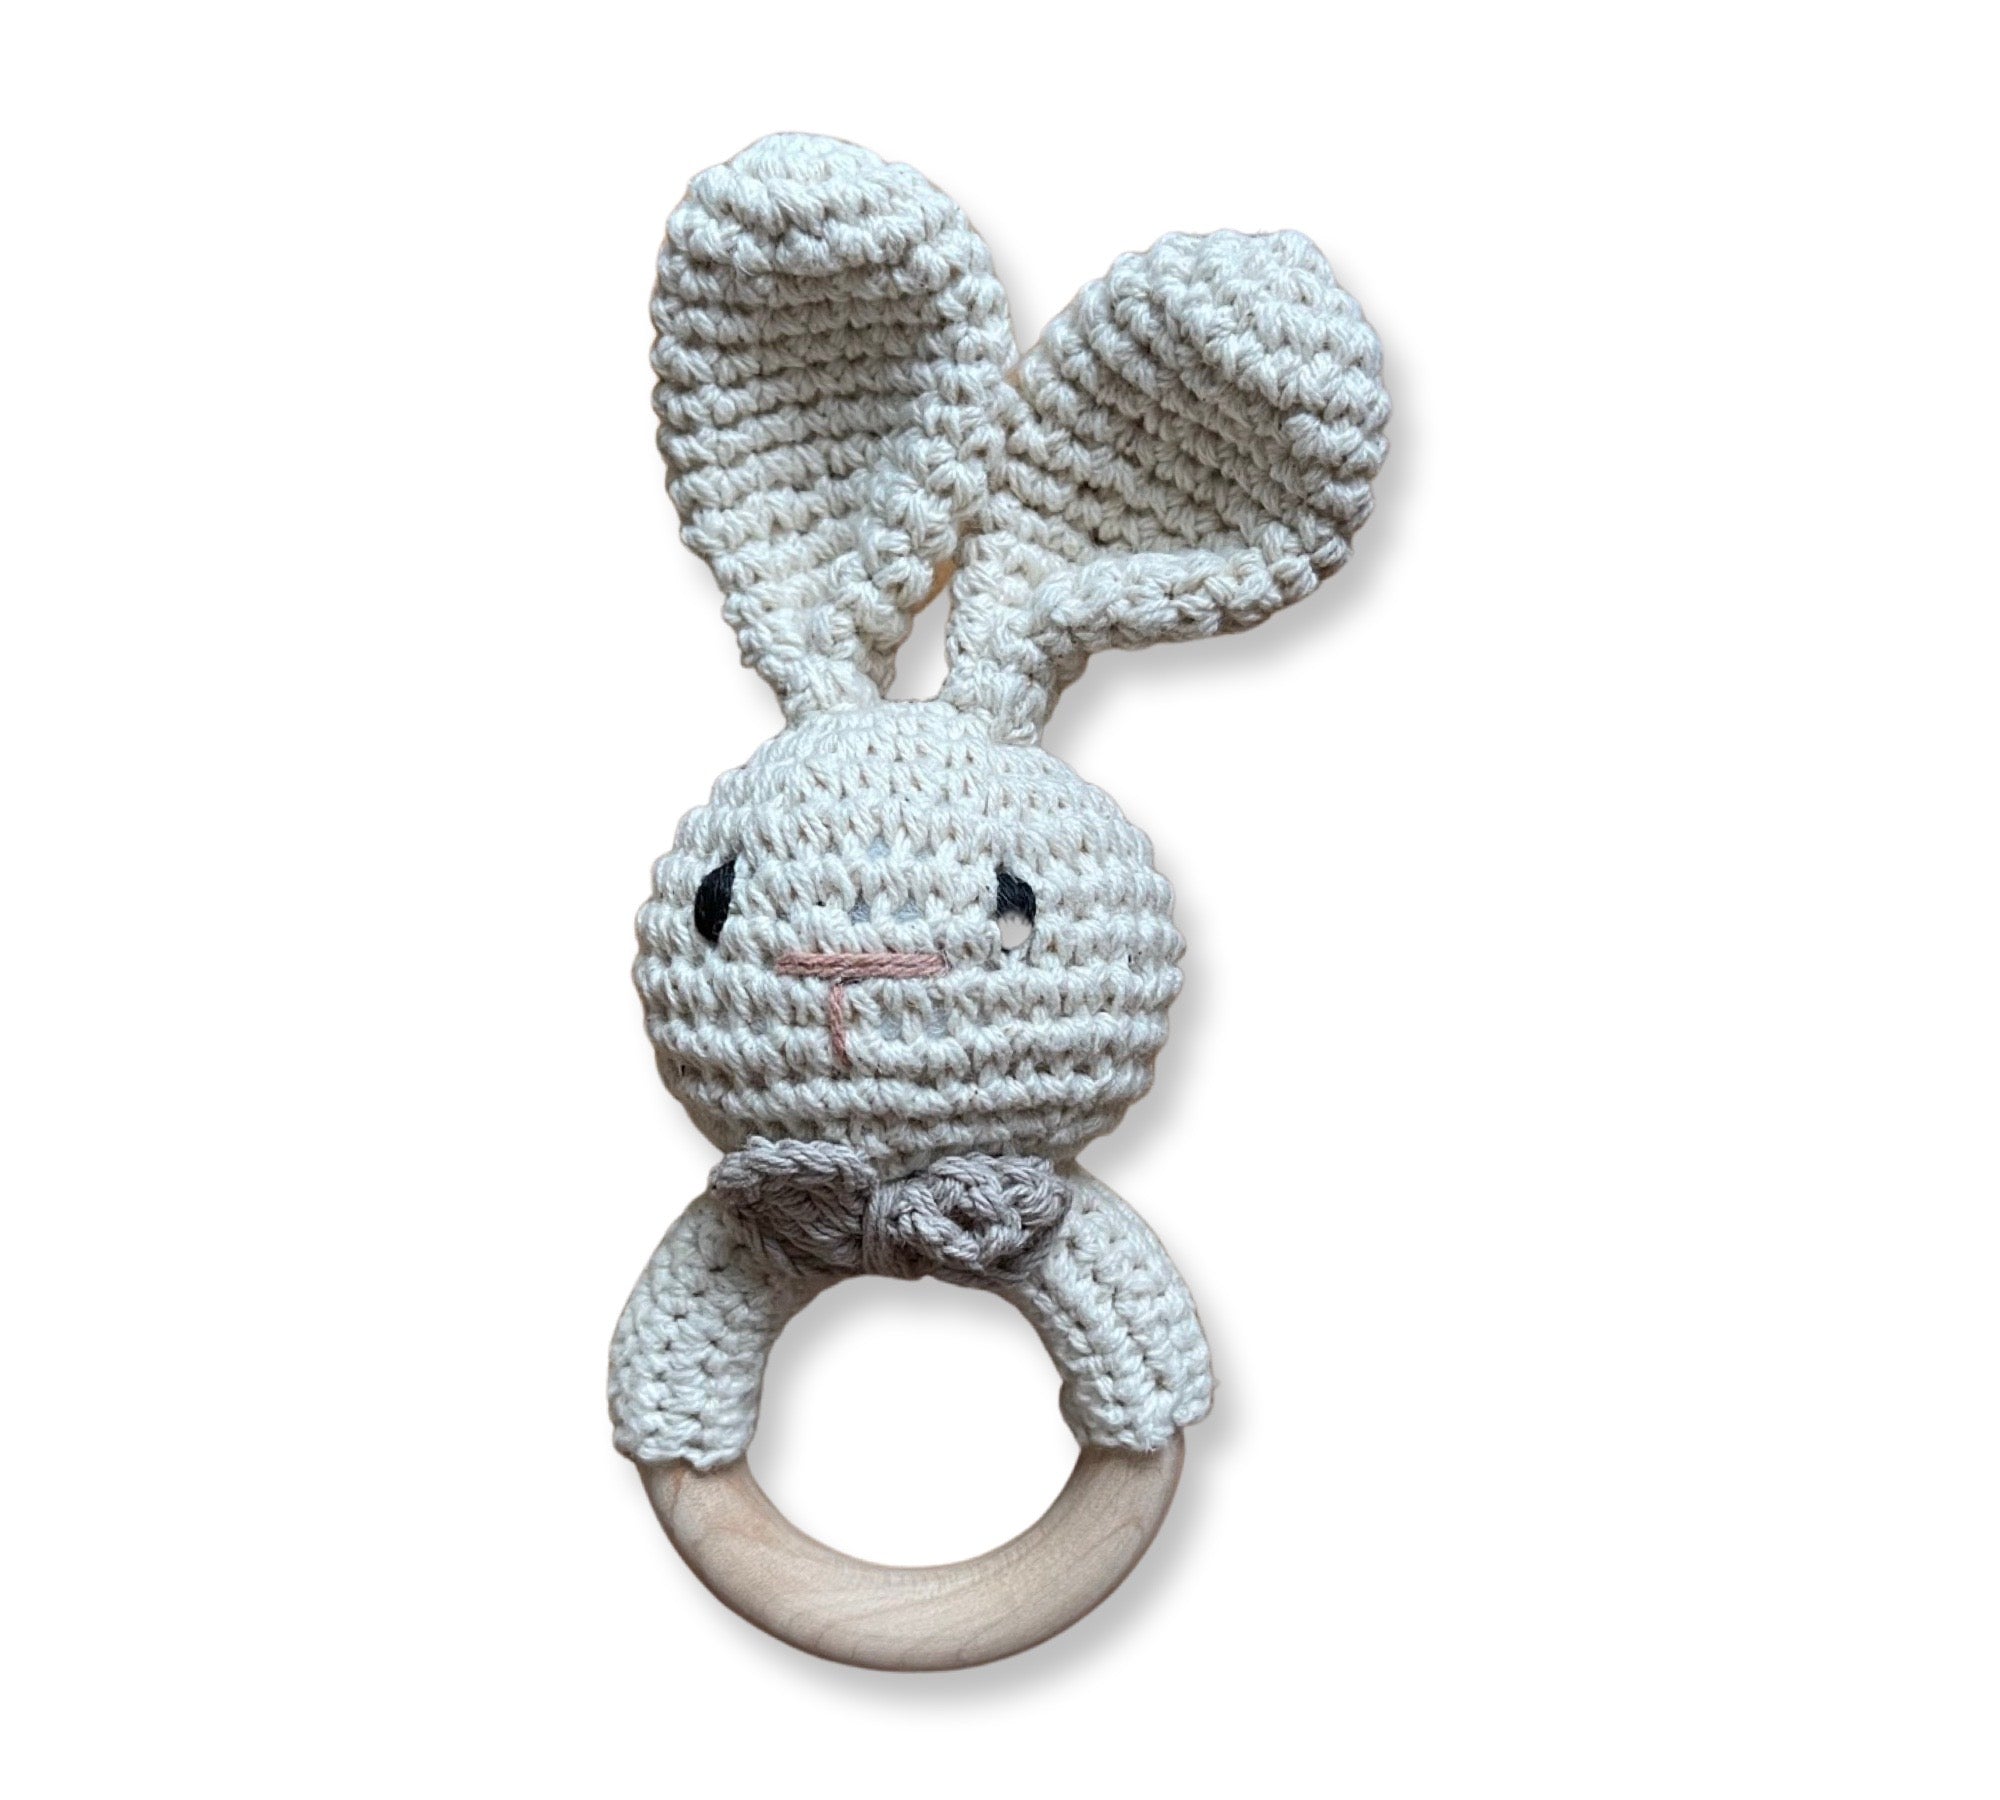 Handcrafted crochet rabbit with a wooden teething ring, perfect as a New Arrival baby giftbox item by giftbox co.